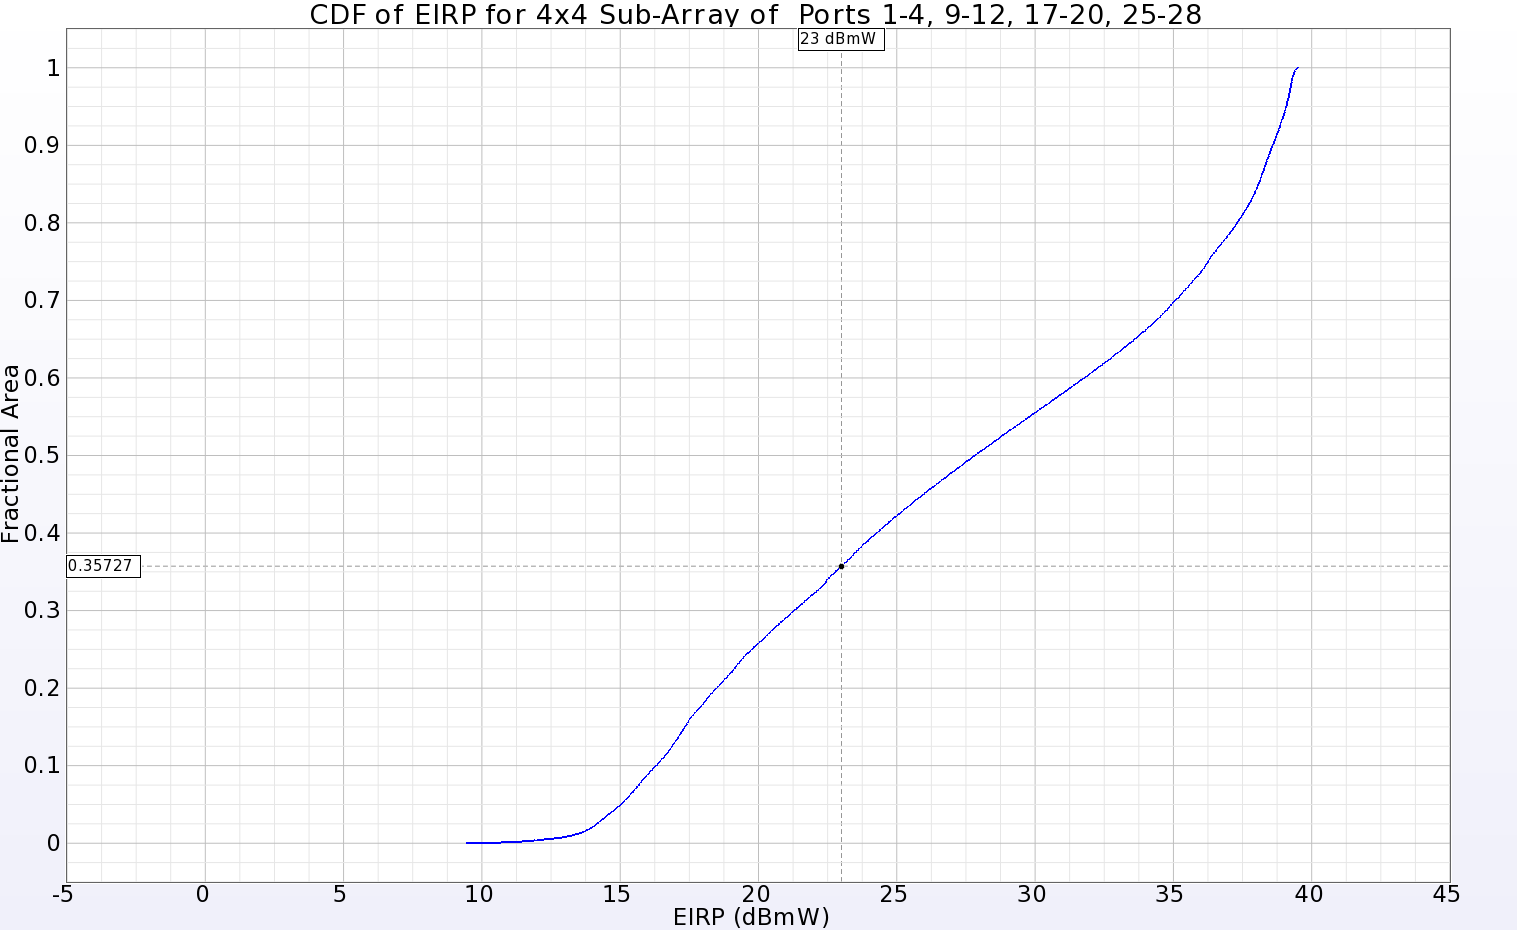 Figure 12: The CDF of EIRP plot for a 4x4 sub-array located in one quadrant of the main array showing positive gain over 64.3% of the far-zone sphere for an input power of 23 dBmW.